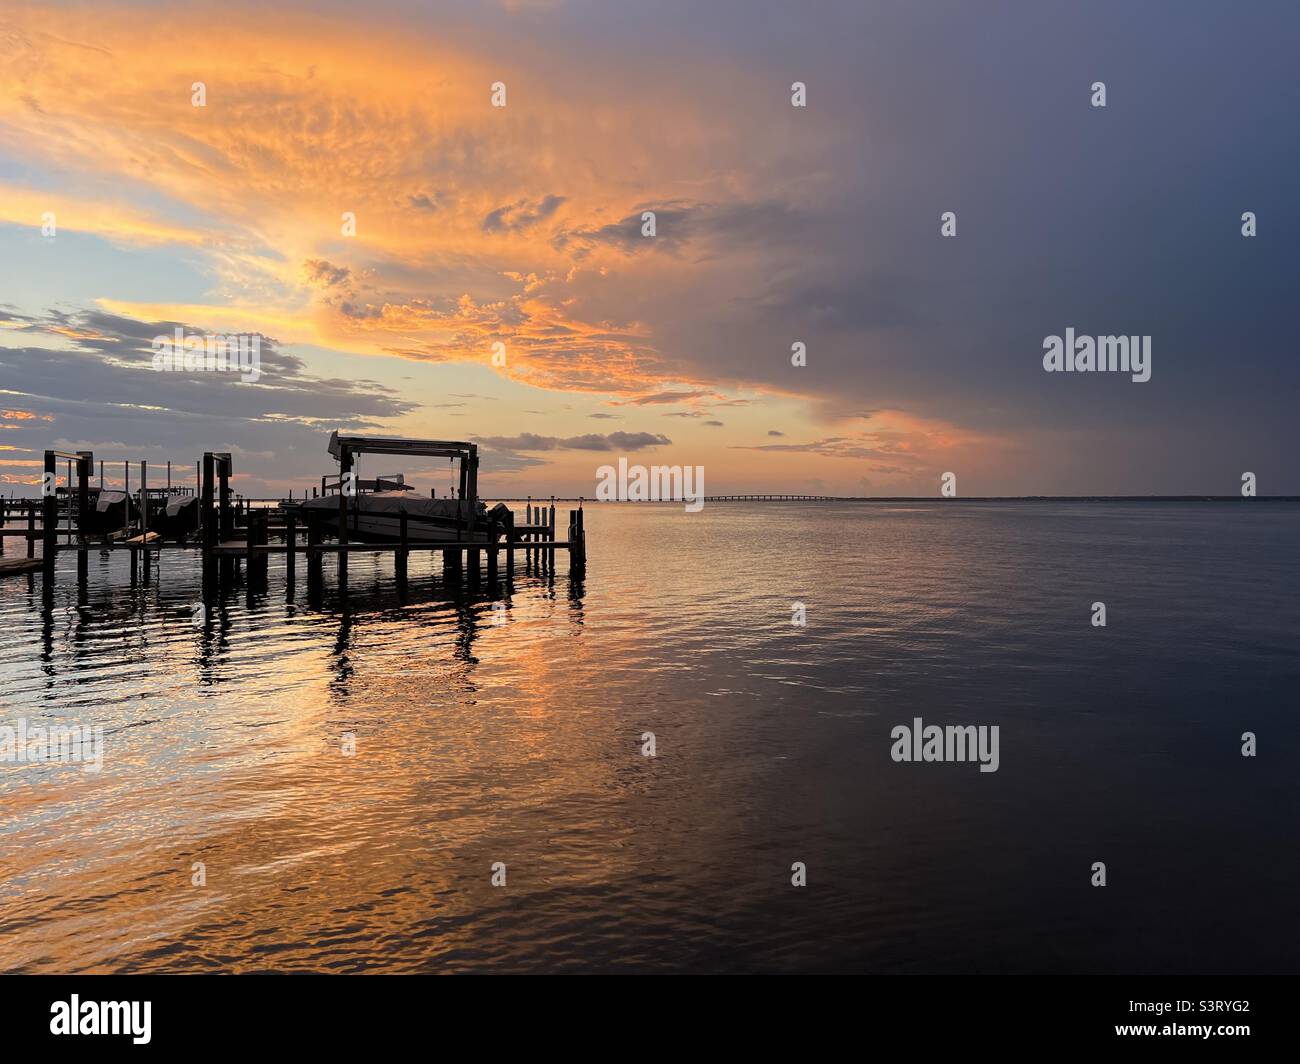 Dramatic sunset skies over boat dock on the water Stock Photo